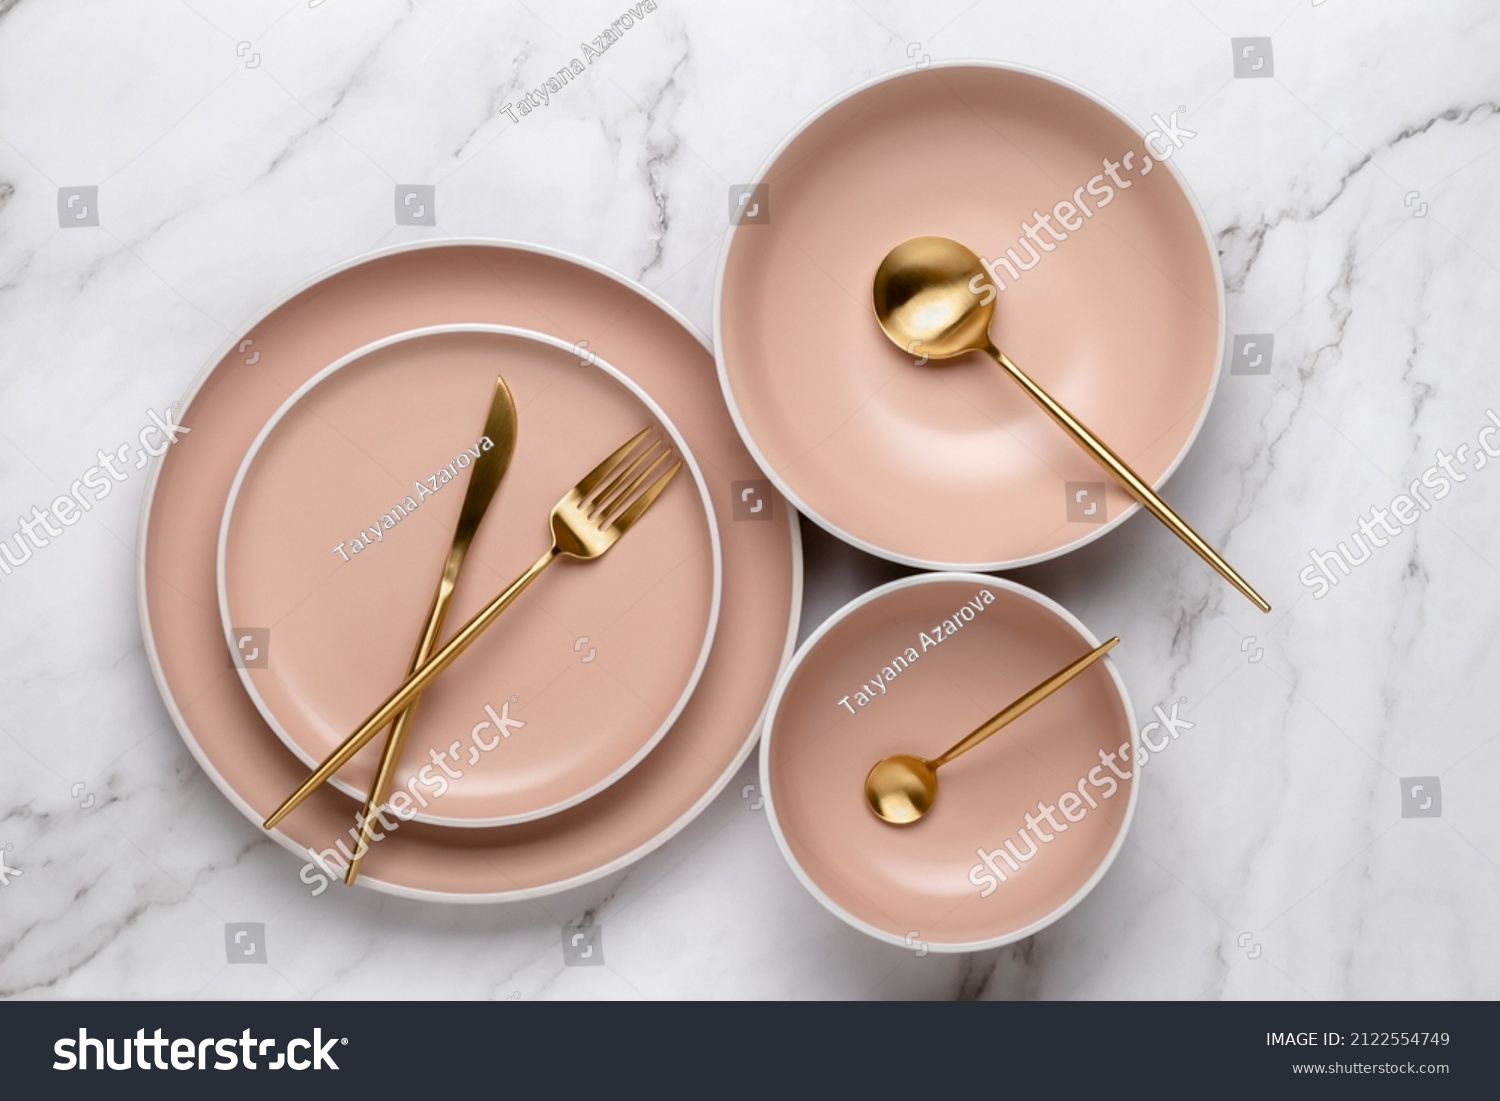 Dishes and utensils for serving and eating meals. Beige round rimmed plates and gold colored cutlery on a white marble table, top view. Modern ceramic crockery, trendy tableware #2122554749